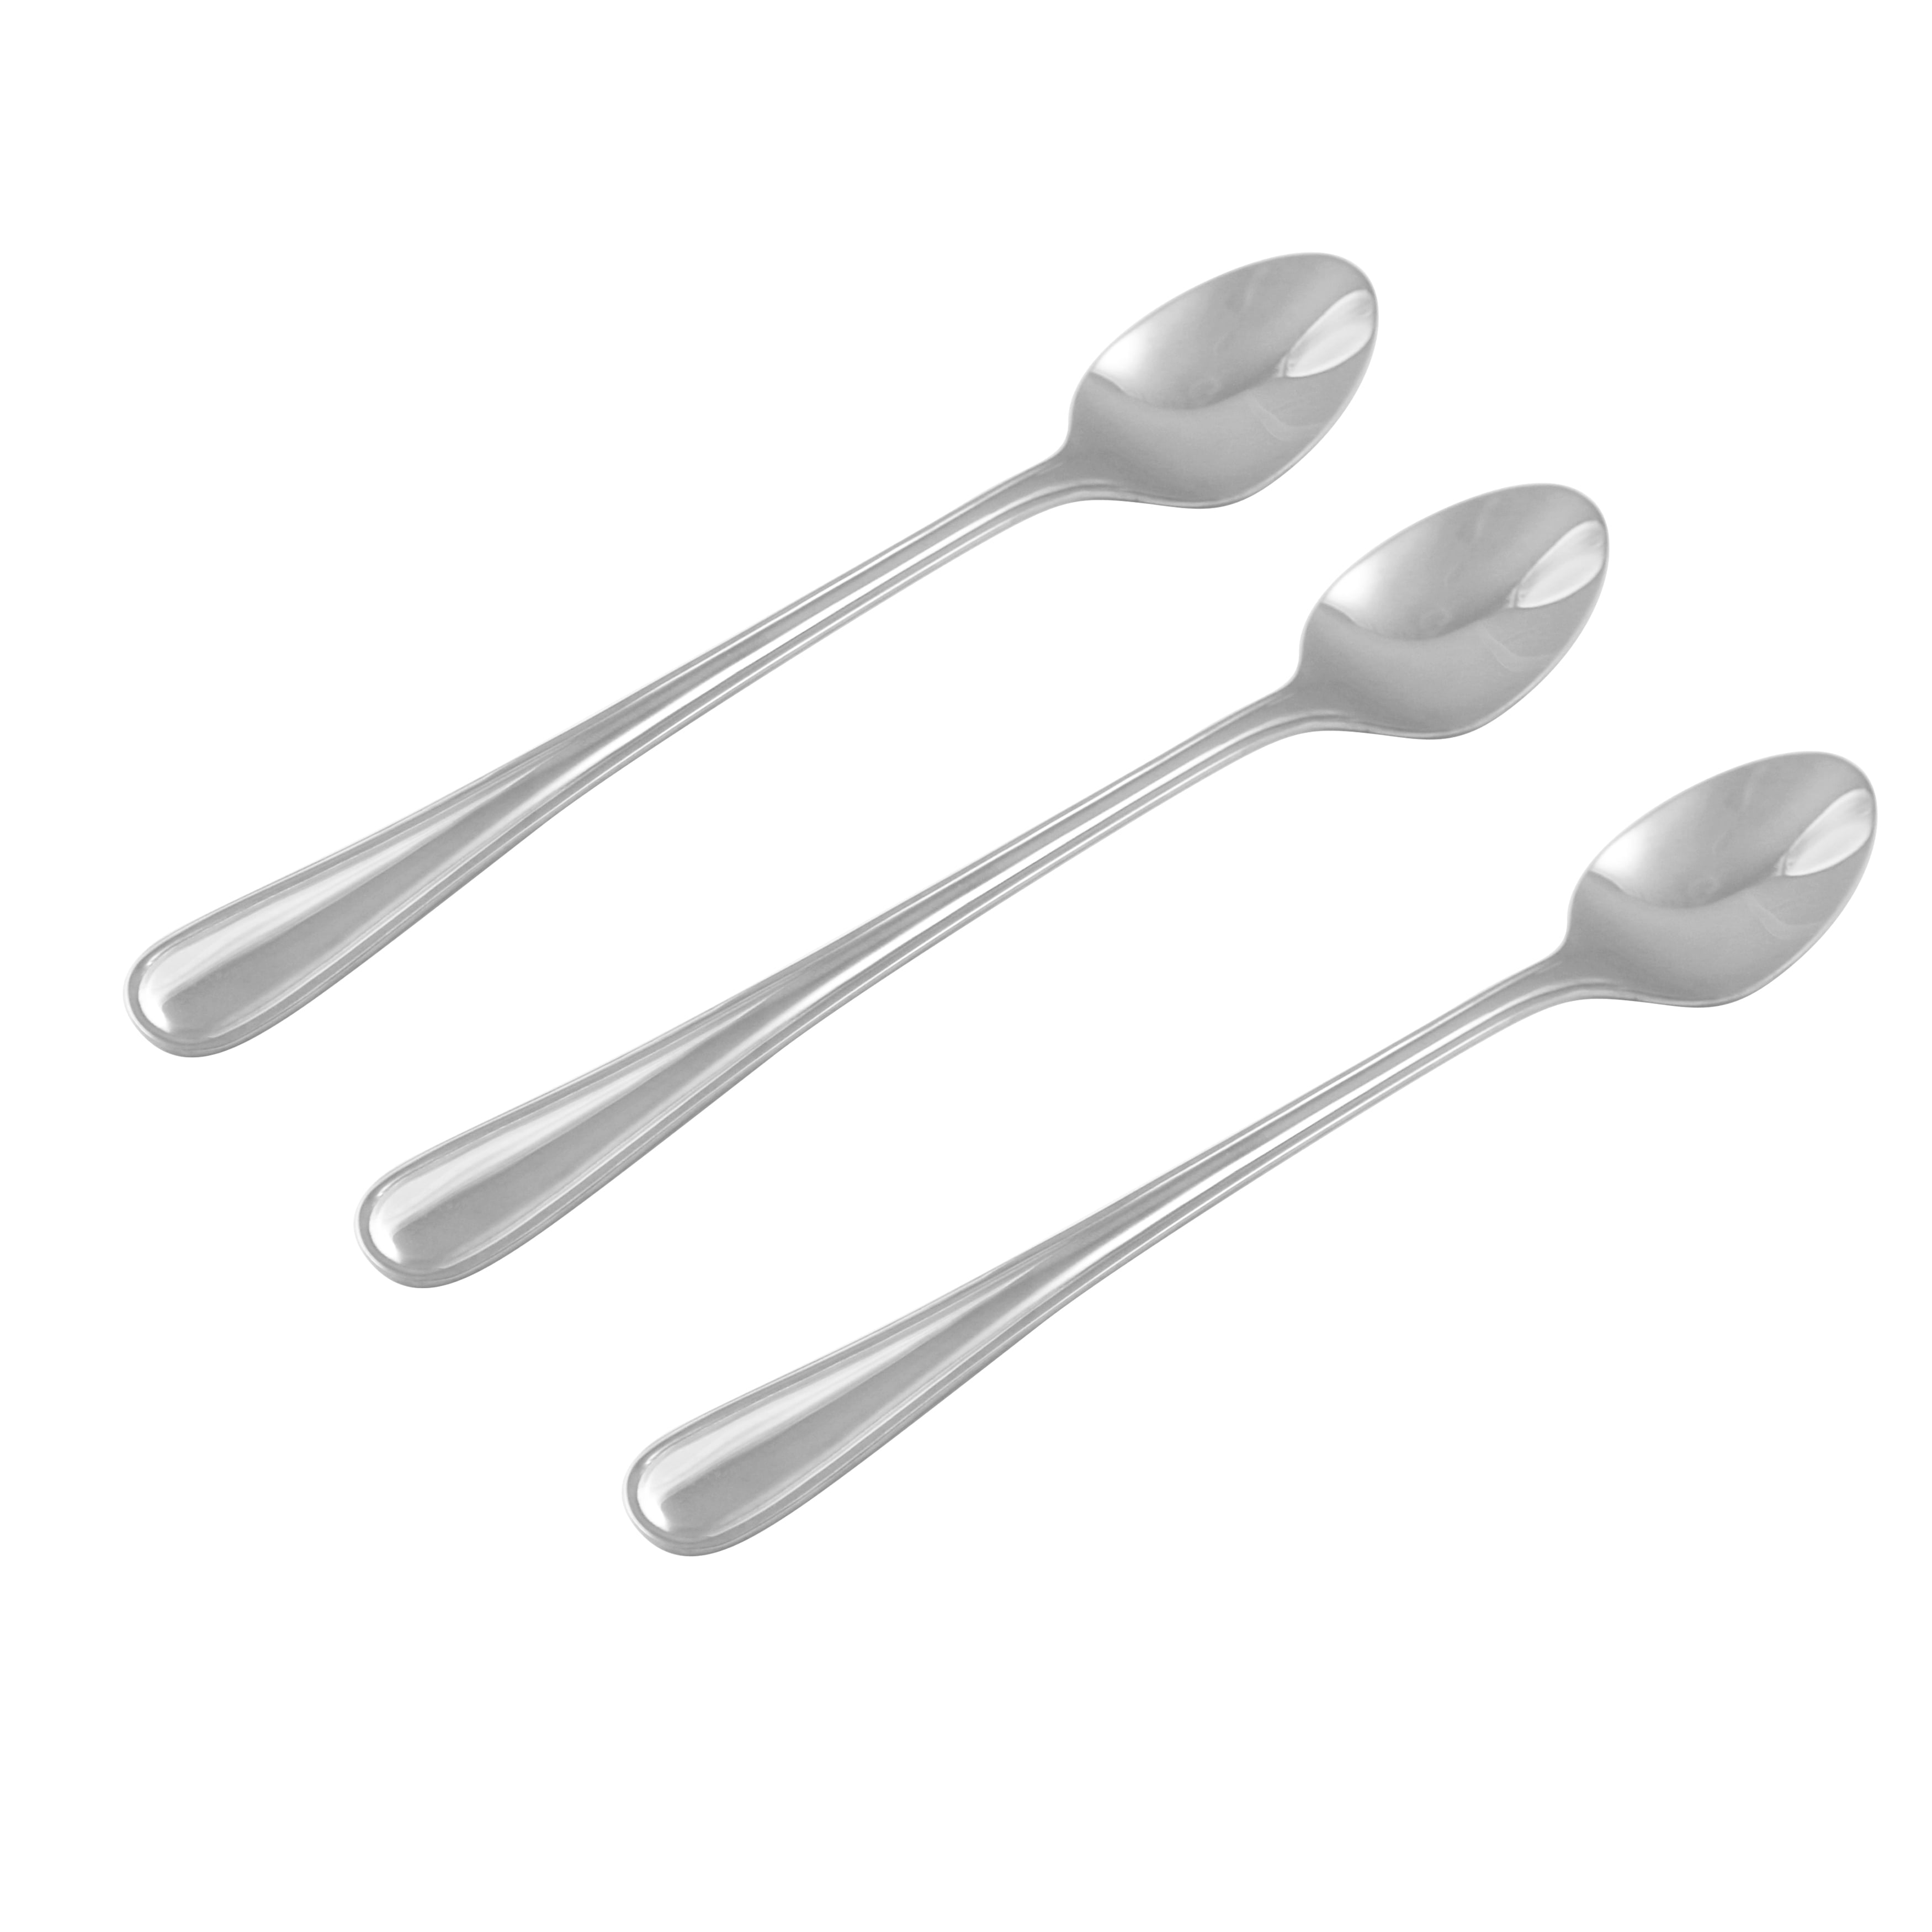 Goeielewe Dinner Spoons Set of 6, Stainless Steel Iced Teaspoons with Ceramic Handle 6.8-inch Long Soup Tablespoons Espresso